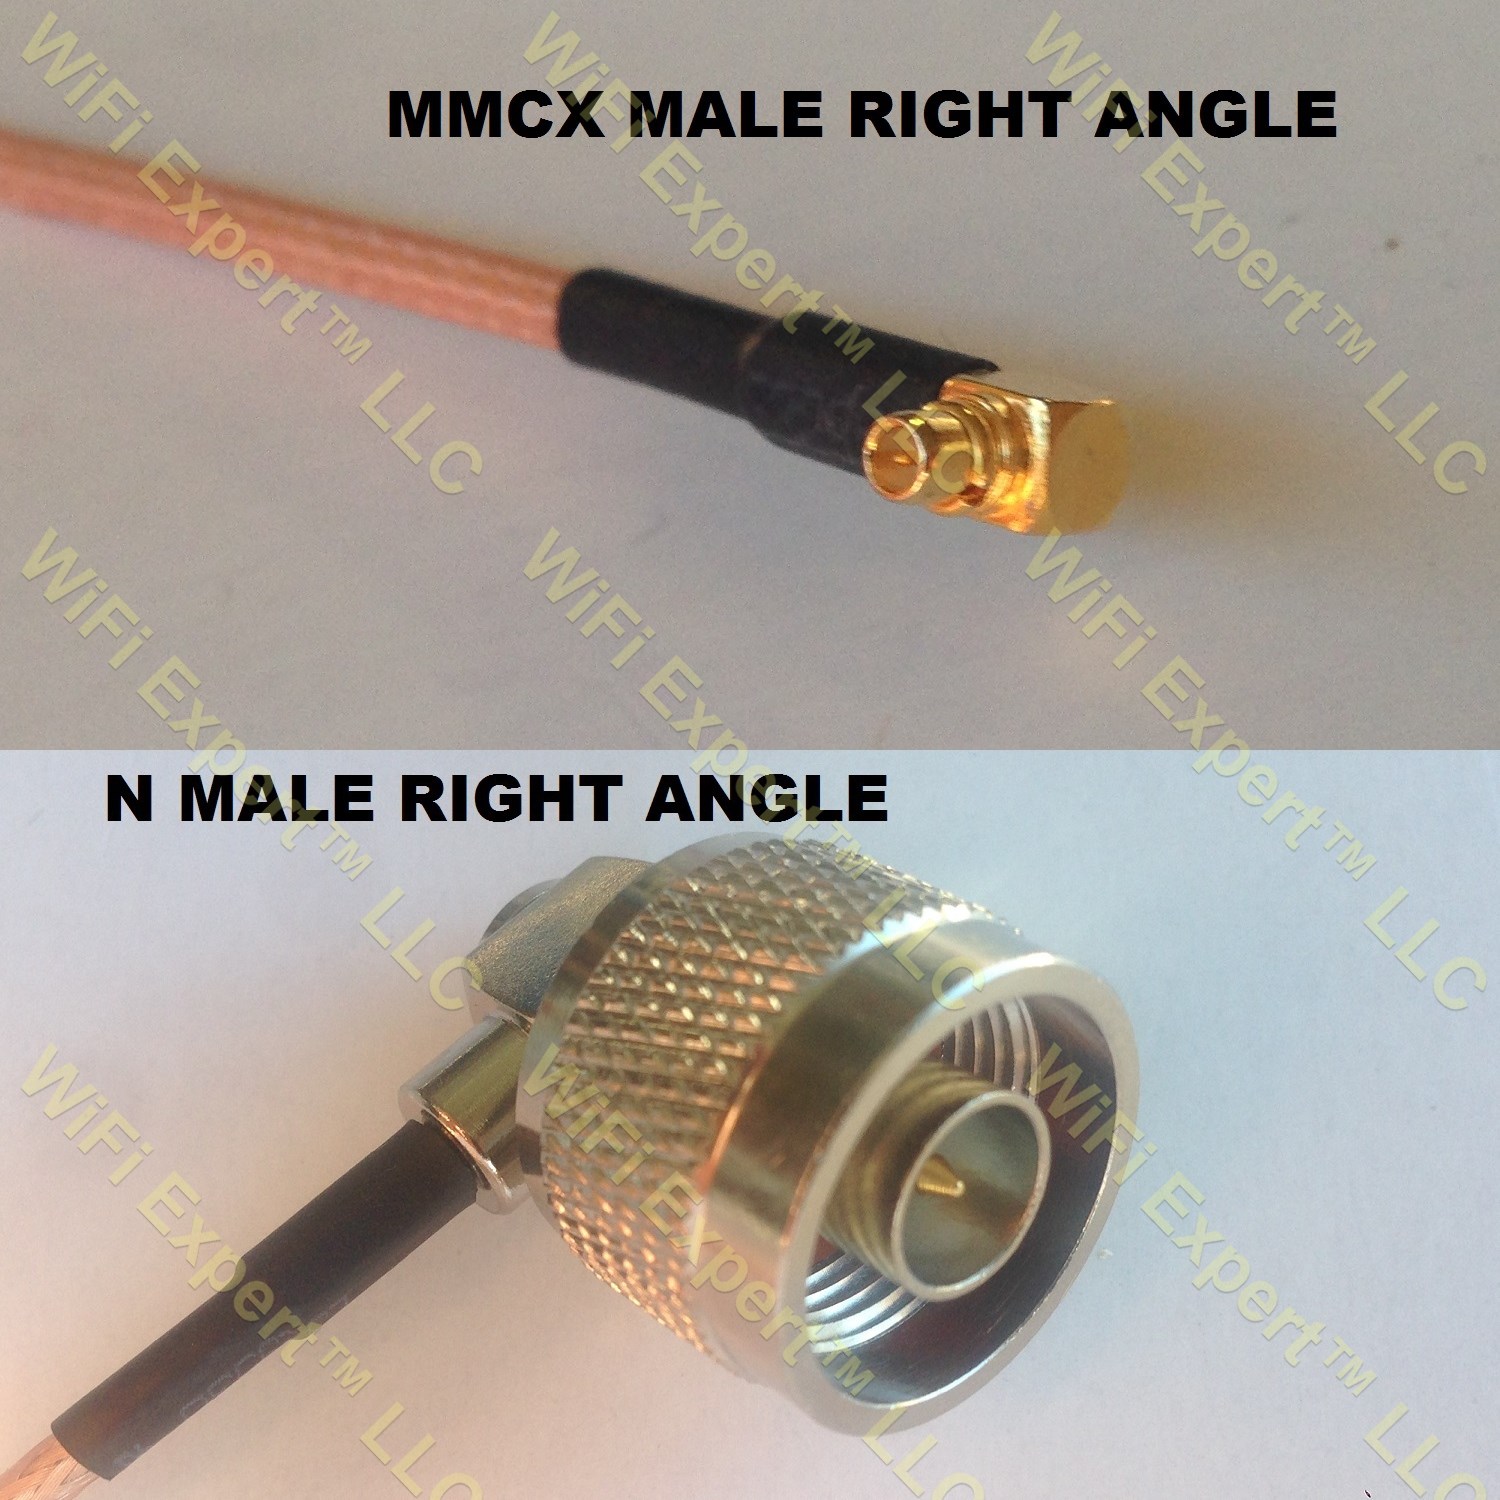 USA-CA RG58 UHF Female Flange to UHF Female Flange Coaxial RF Pigtail Cable 